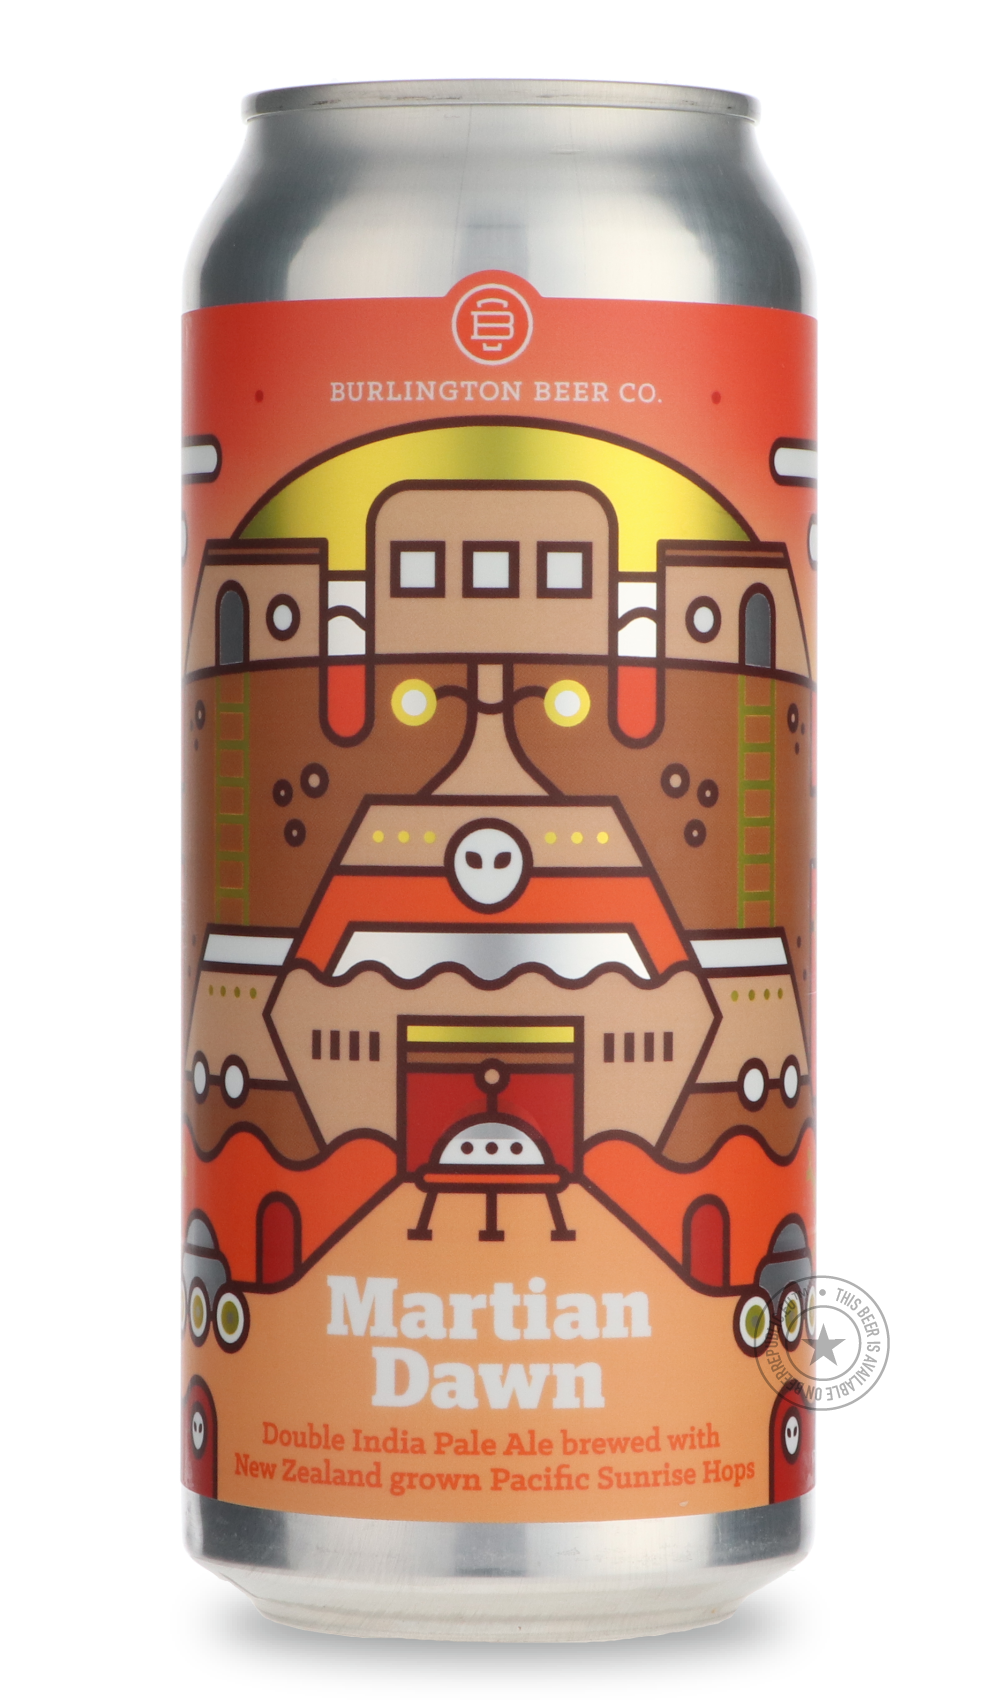 -Burlington- Martian Dawn-IPA- Only @ Beer Republic - The best online beer store for American & Canadian craft beer - Buy beer online from the USA and Canada - Bier online kopen - Amerikaans bier kopen - Craft beer store - Craft beer kopen - Amerikanisch bier kaufen - Bier online kaufen - Acheter biere online - IPA - Stout - Porter - New England IPA - Hazy IPA - Imperial Stout - Barrel Aged - Barrel Aged Imperial Stout - Brown - Dark beer - Blond - Blonde - Pilsner - Lager - Wheat - Weizen - Amber - Barley 